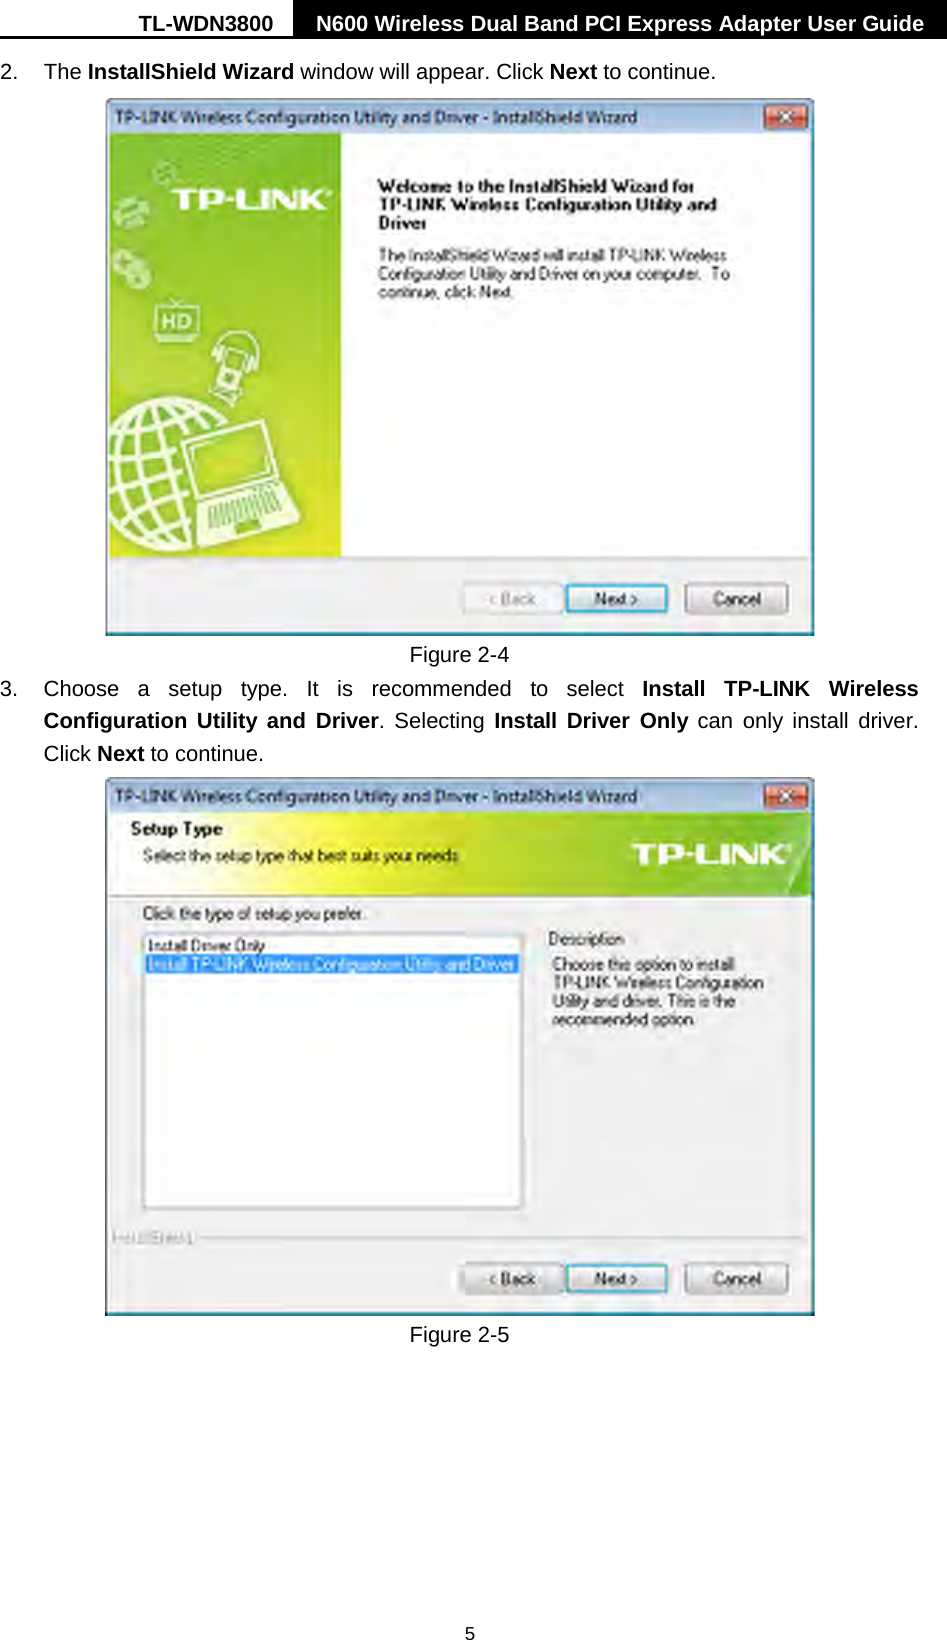 TL-WDN3800 N600 Wireless Dual Band PCI Express Adapter User Guide   5 2. The InstallShield Wizard window will appear. Click Next to continue.  Figure 2-4 3.  Choose a setup type. It is recommended to  select  Install  TP-LINK Wireless Configuration Utility and Driver. Selecting Install Driver Only can only install driver. Click Next to continue.  Figure 2-5 